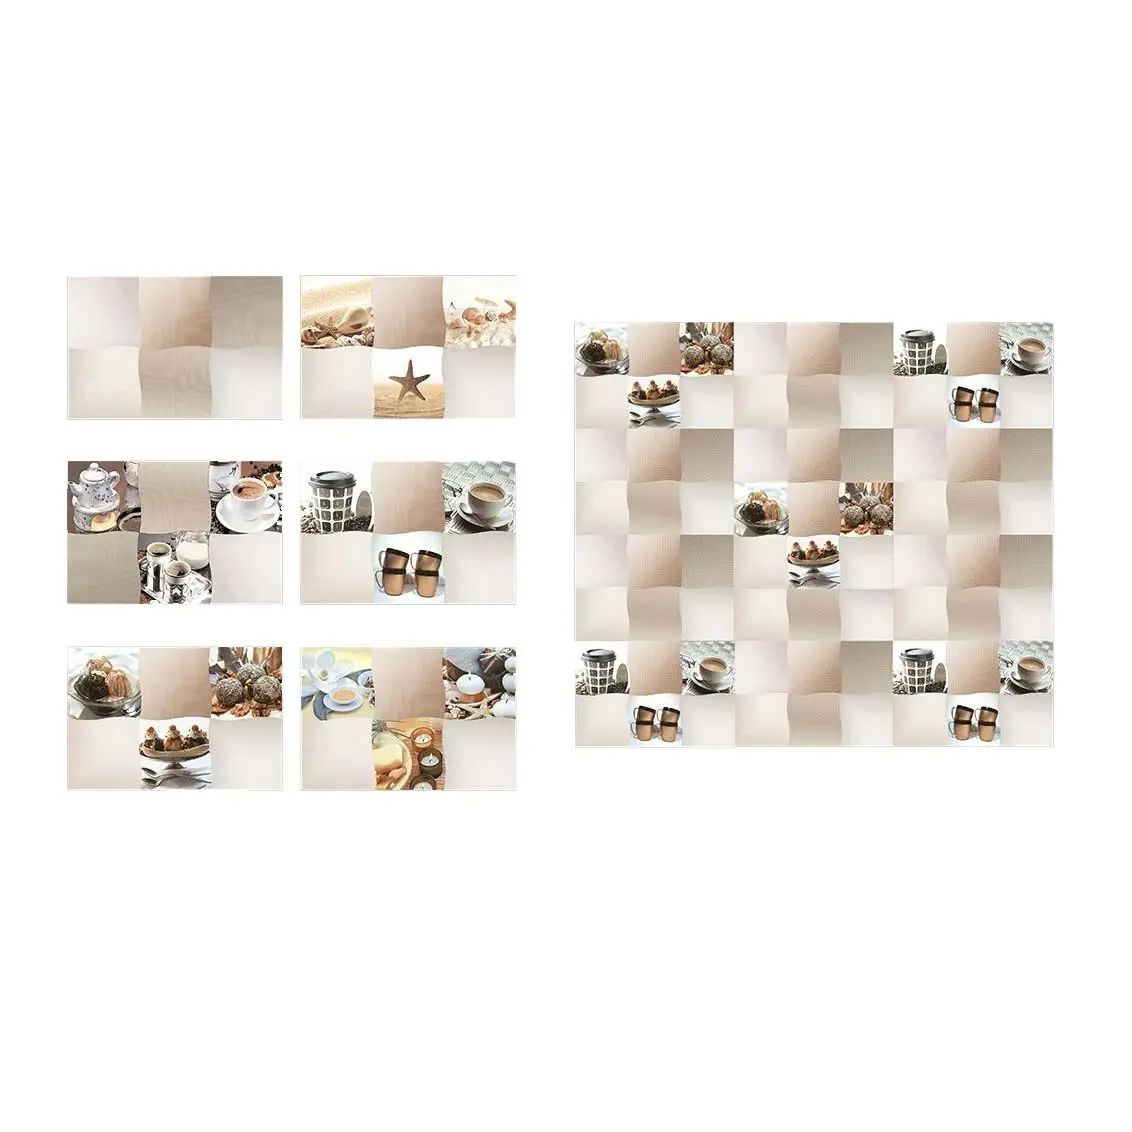 250x375mm light brown and white color high gloss kitchen design decorative wall tiles